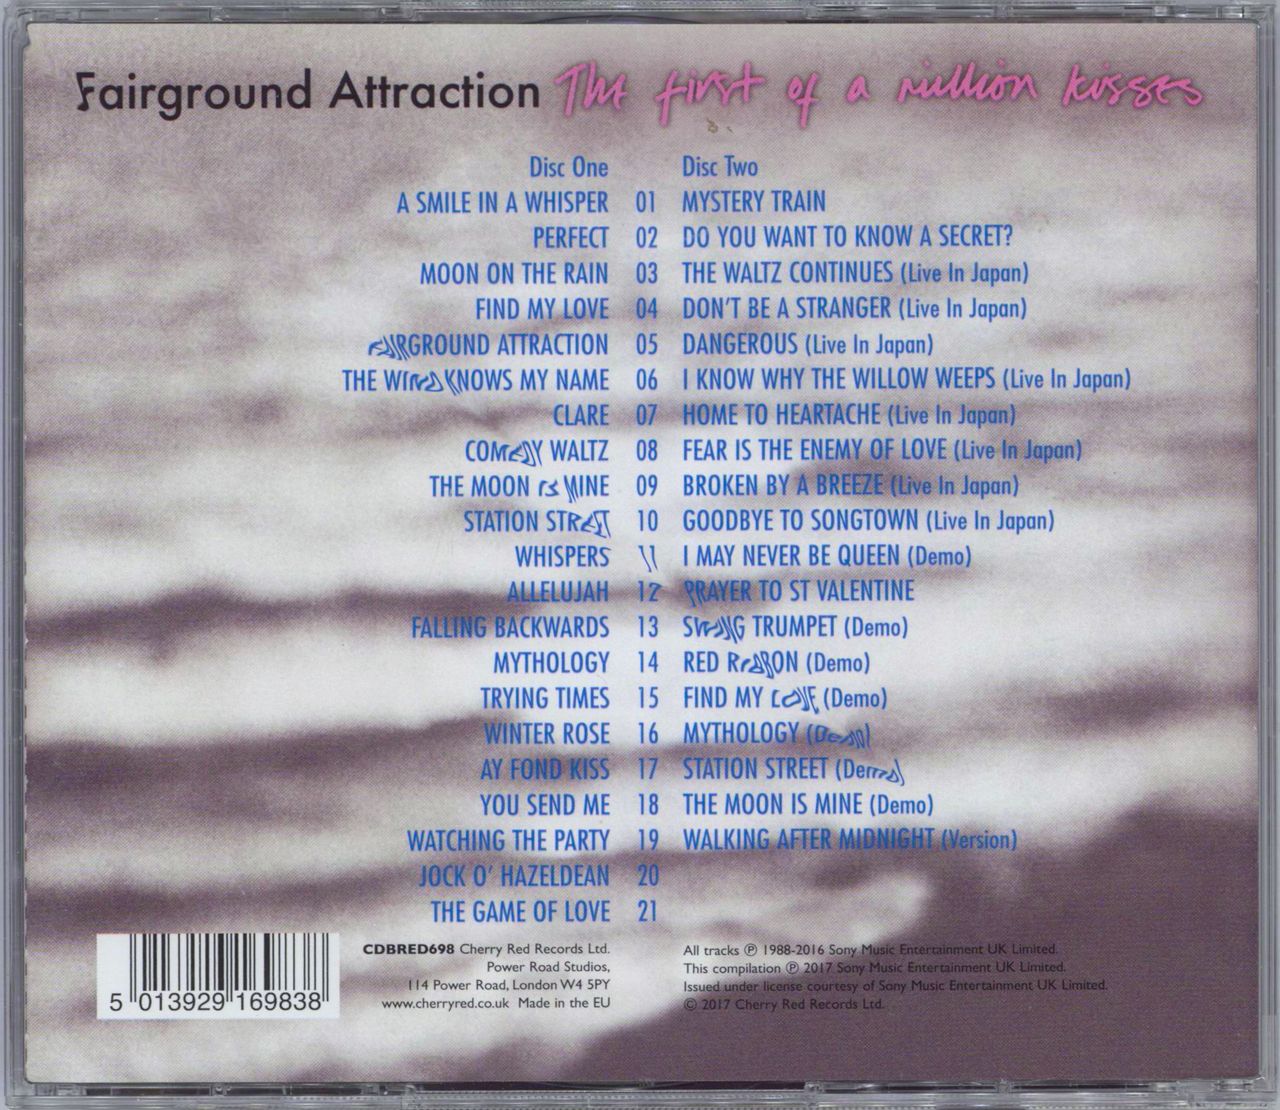 Fairground Attraction The First Of A Million Kisses UK 2 CD album set (Double CD) F-A2CTH767542